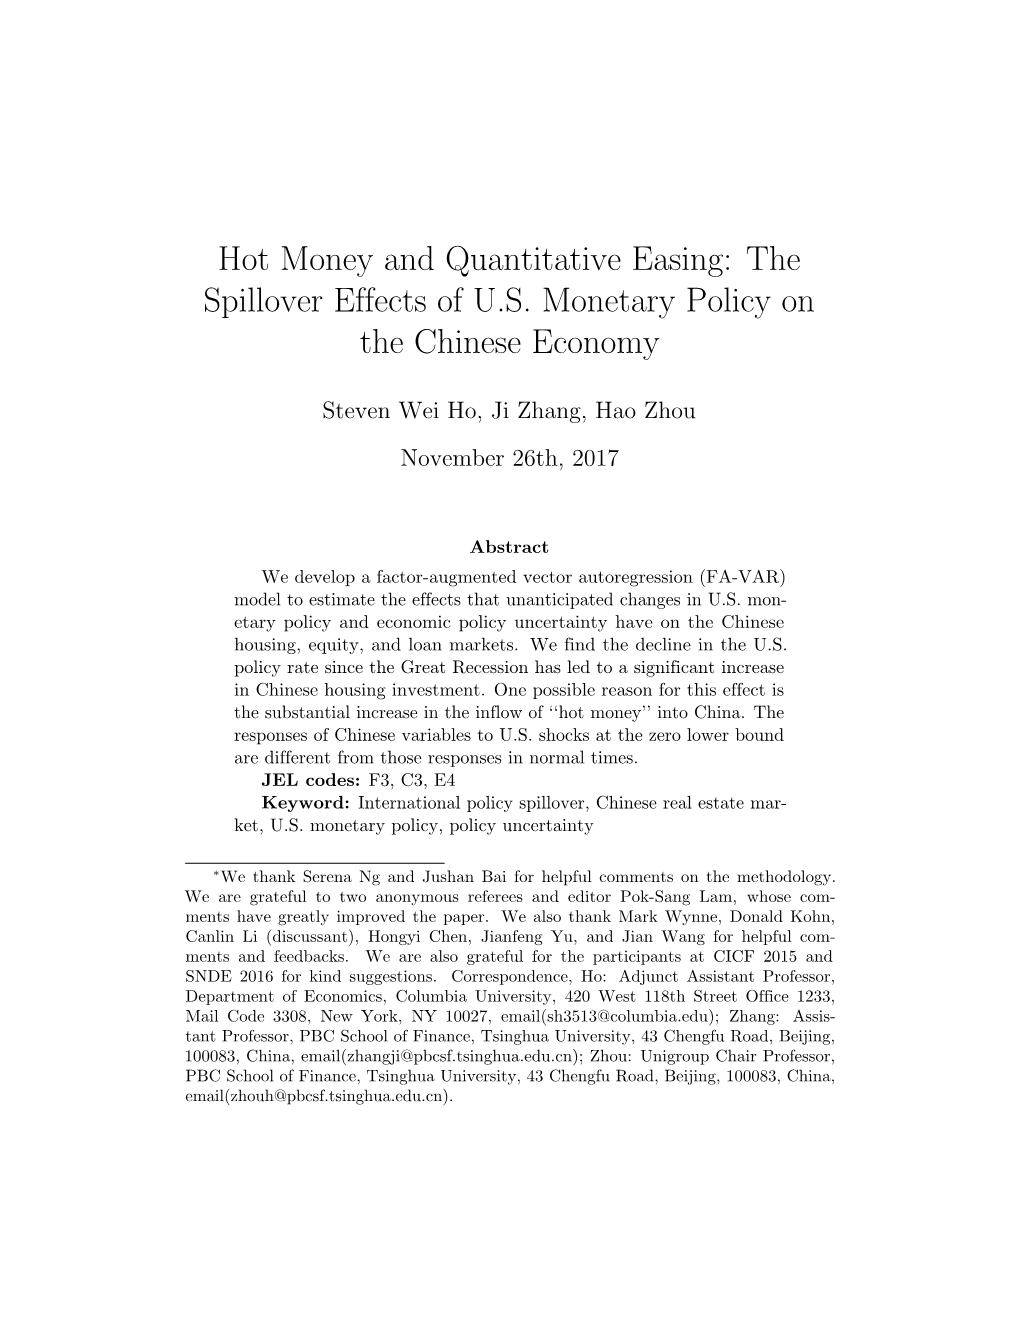 Hot Money and Quantitative Easing: the Spillover Effects of U.S. Monetary Policy on the Chinese Economy